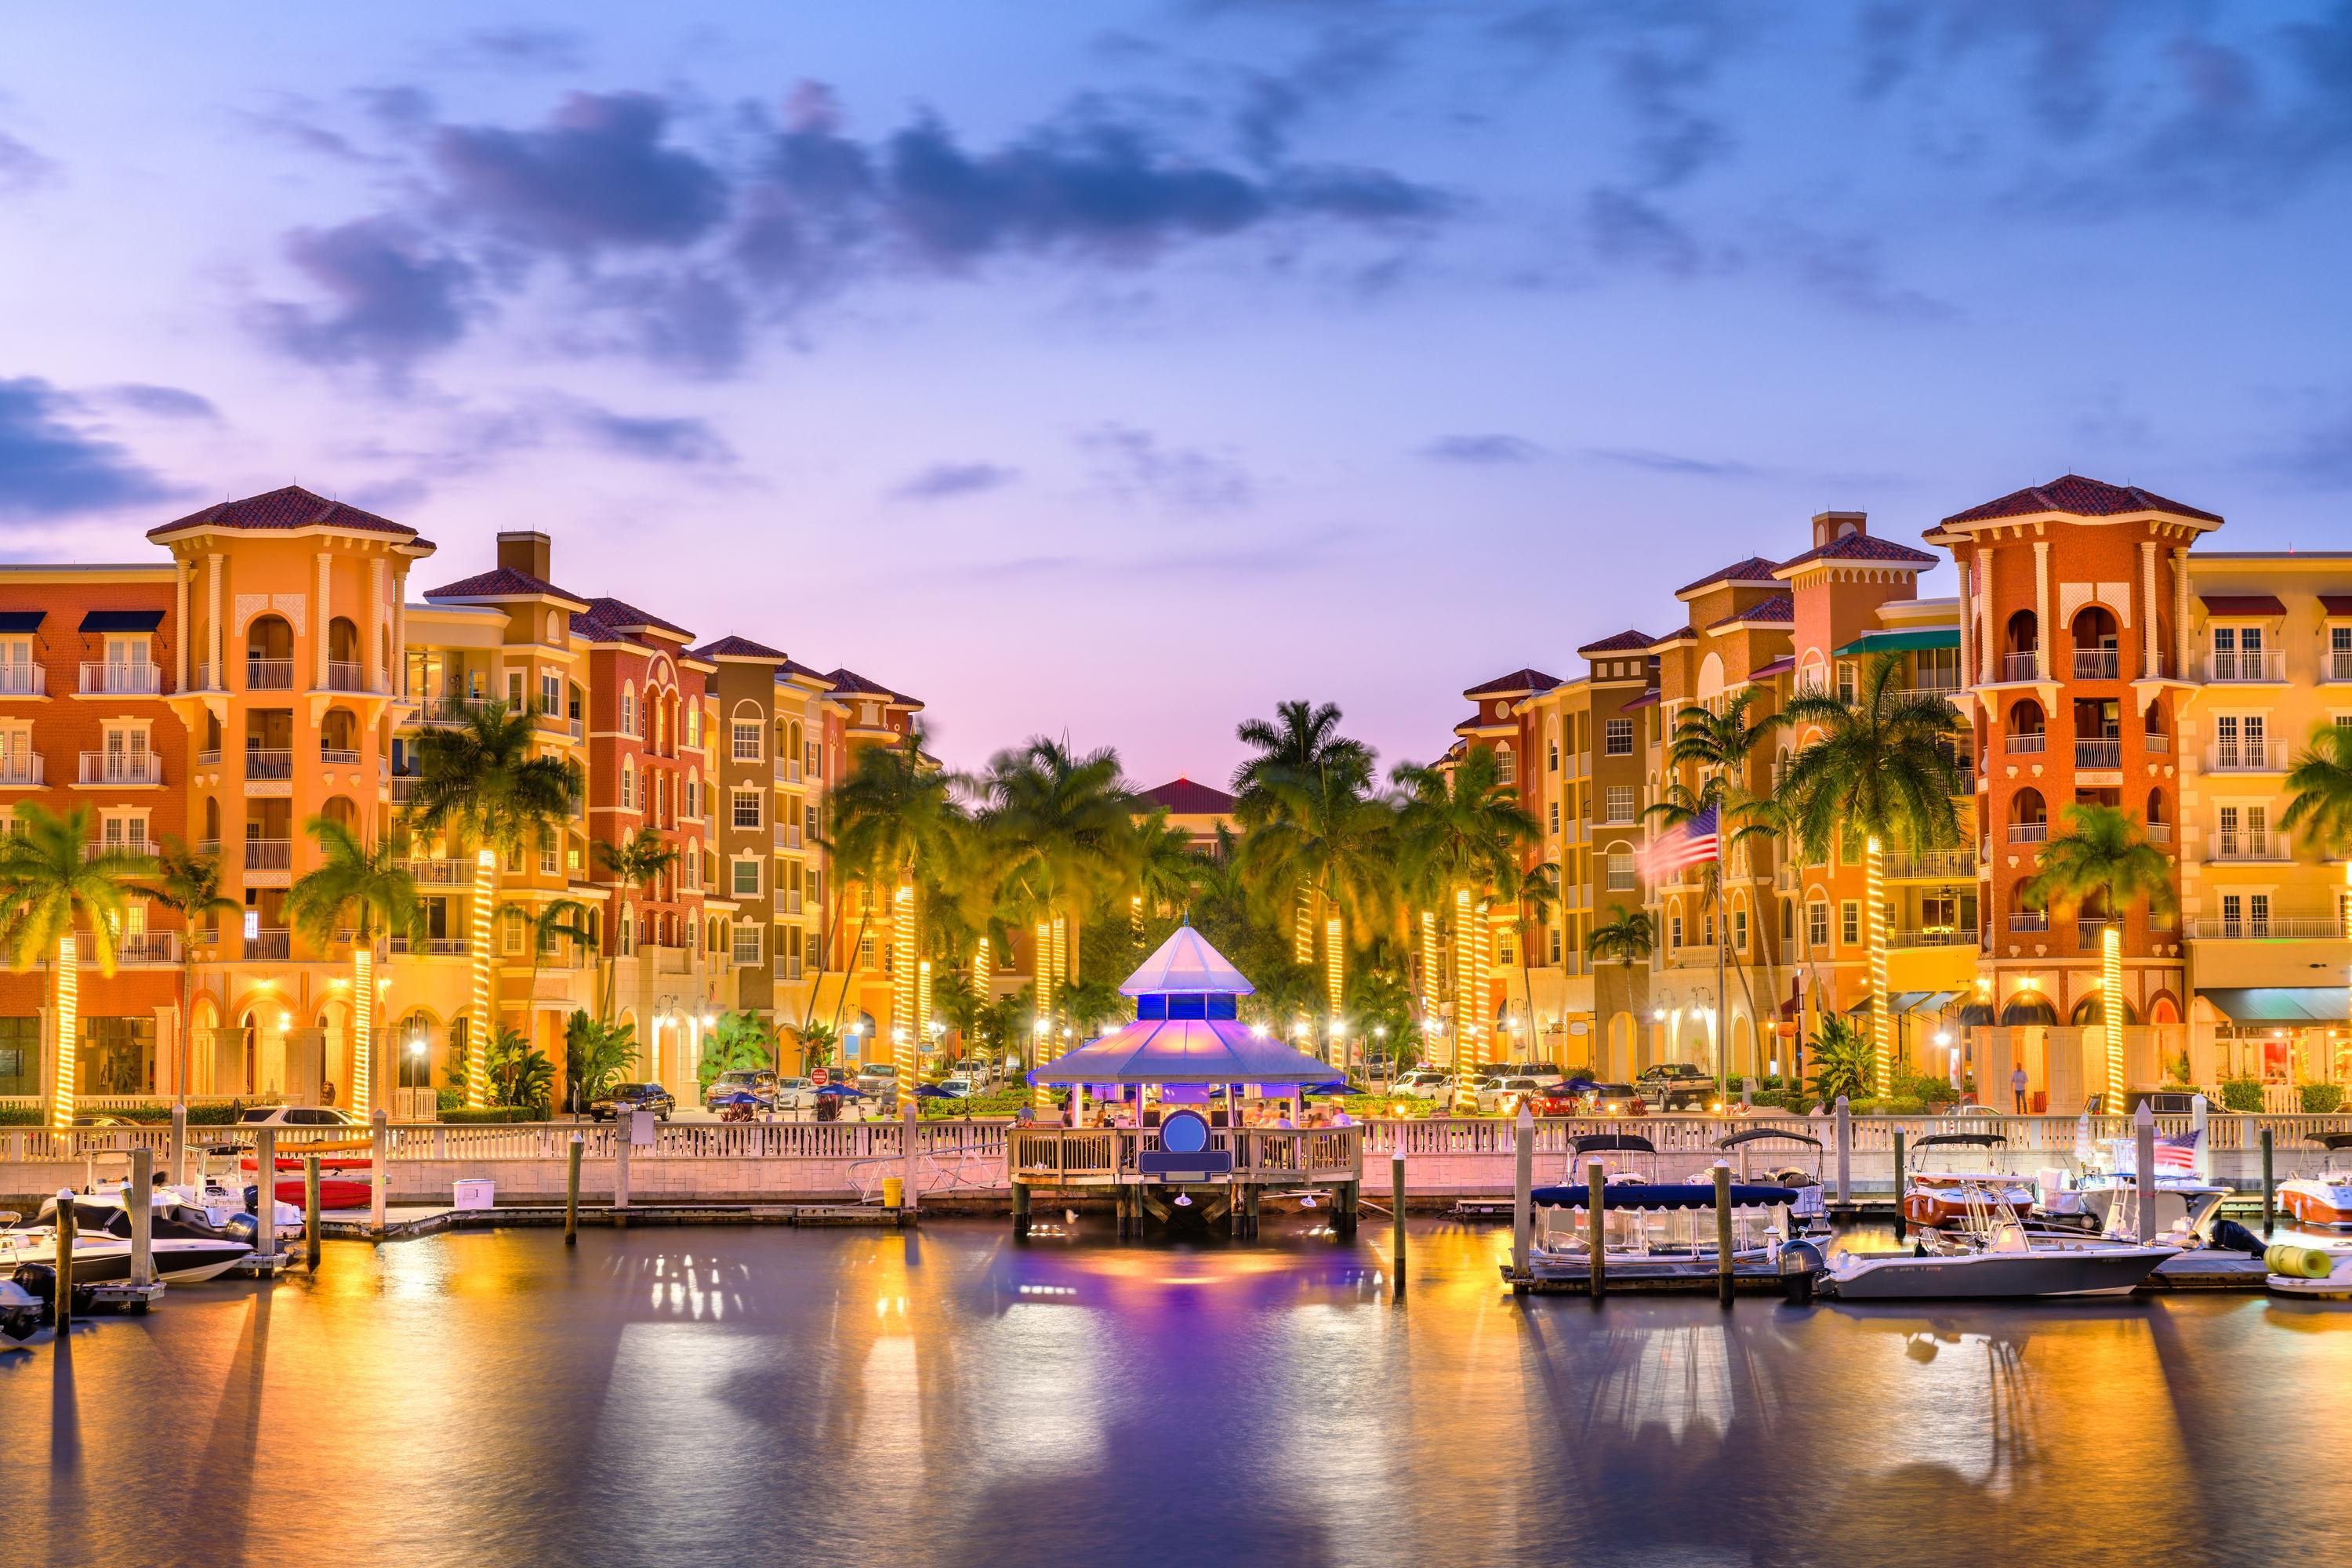 16 Best Hotels in Naples, Florida. Hotels from $115/night - KAYAK